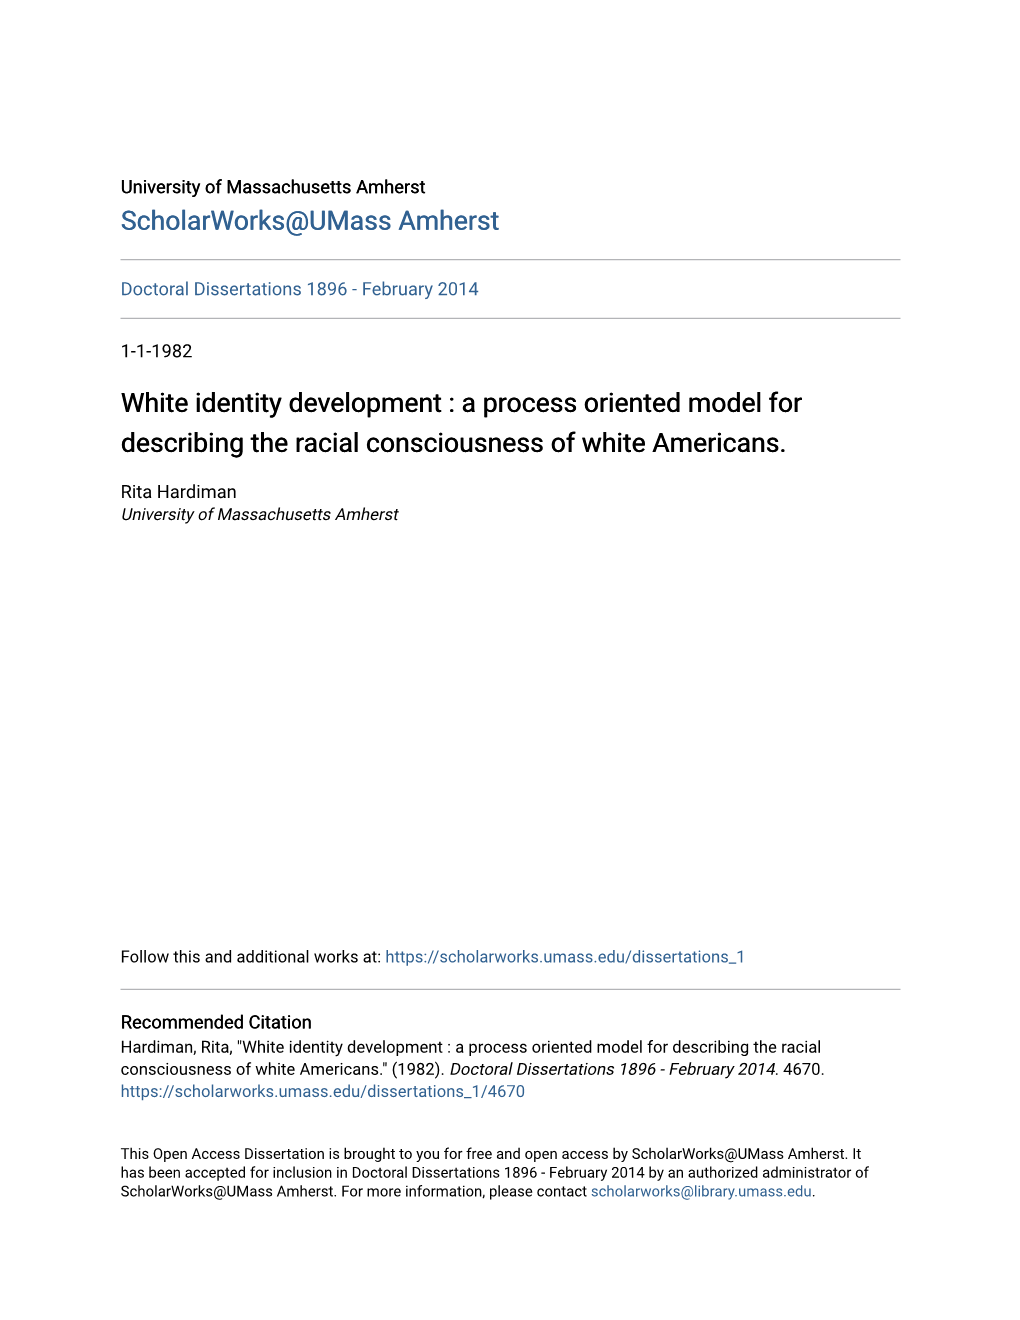 White Identity Development : a Process Oriented Model for Describing the Racial Consciousness of White Americans